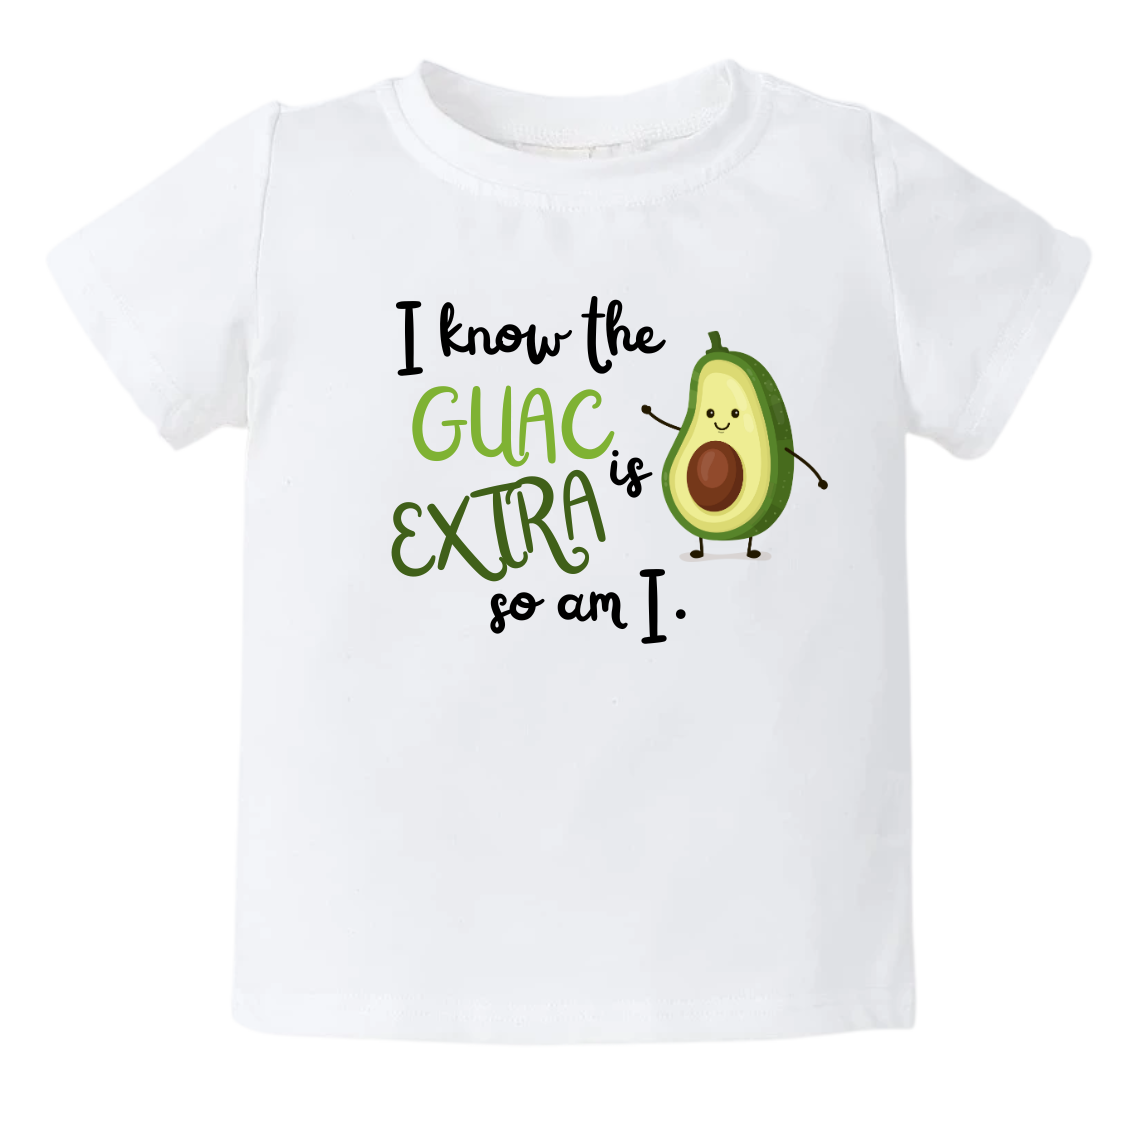 I Know the Guac is Extra so am I Baby Onesie® Cute Avocado Baby Clothes for Kids Outfit Gift for Newborn Clothes